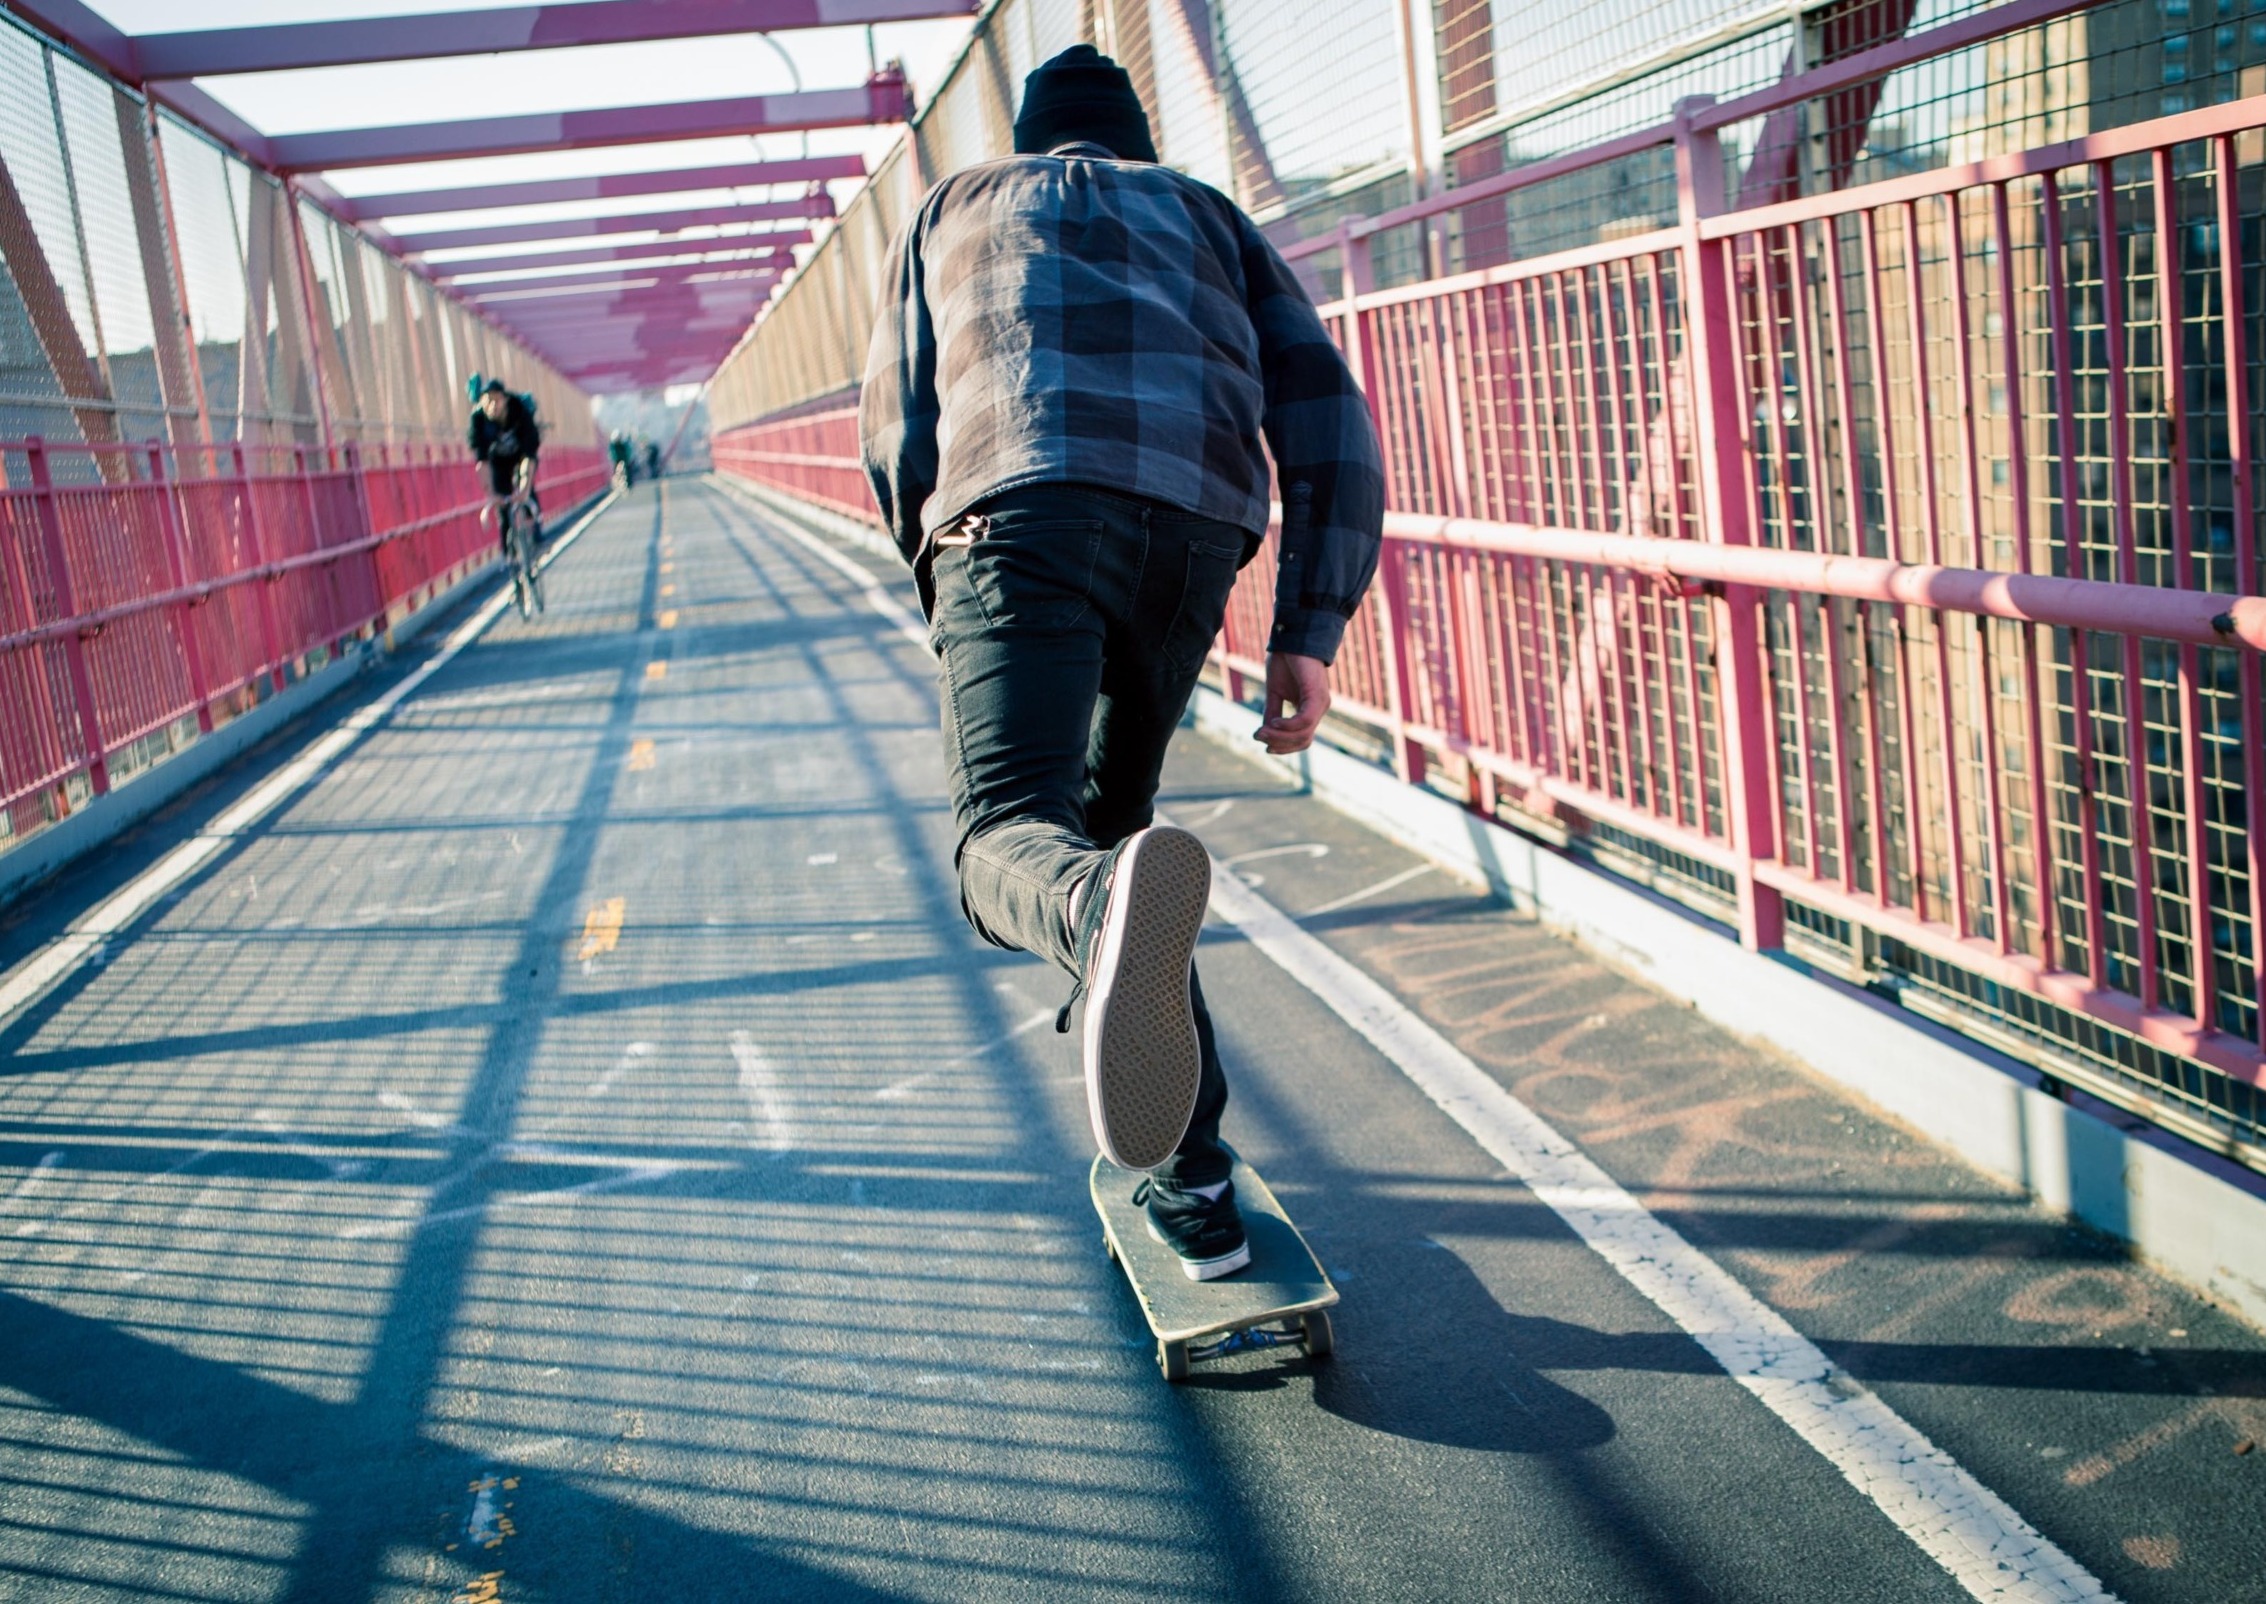 First-time juvenile offenders: Teen skateboarder in jeans and blue plaid shirt speeds through the pedestrian walkway on paved road over red metal bridge